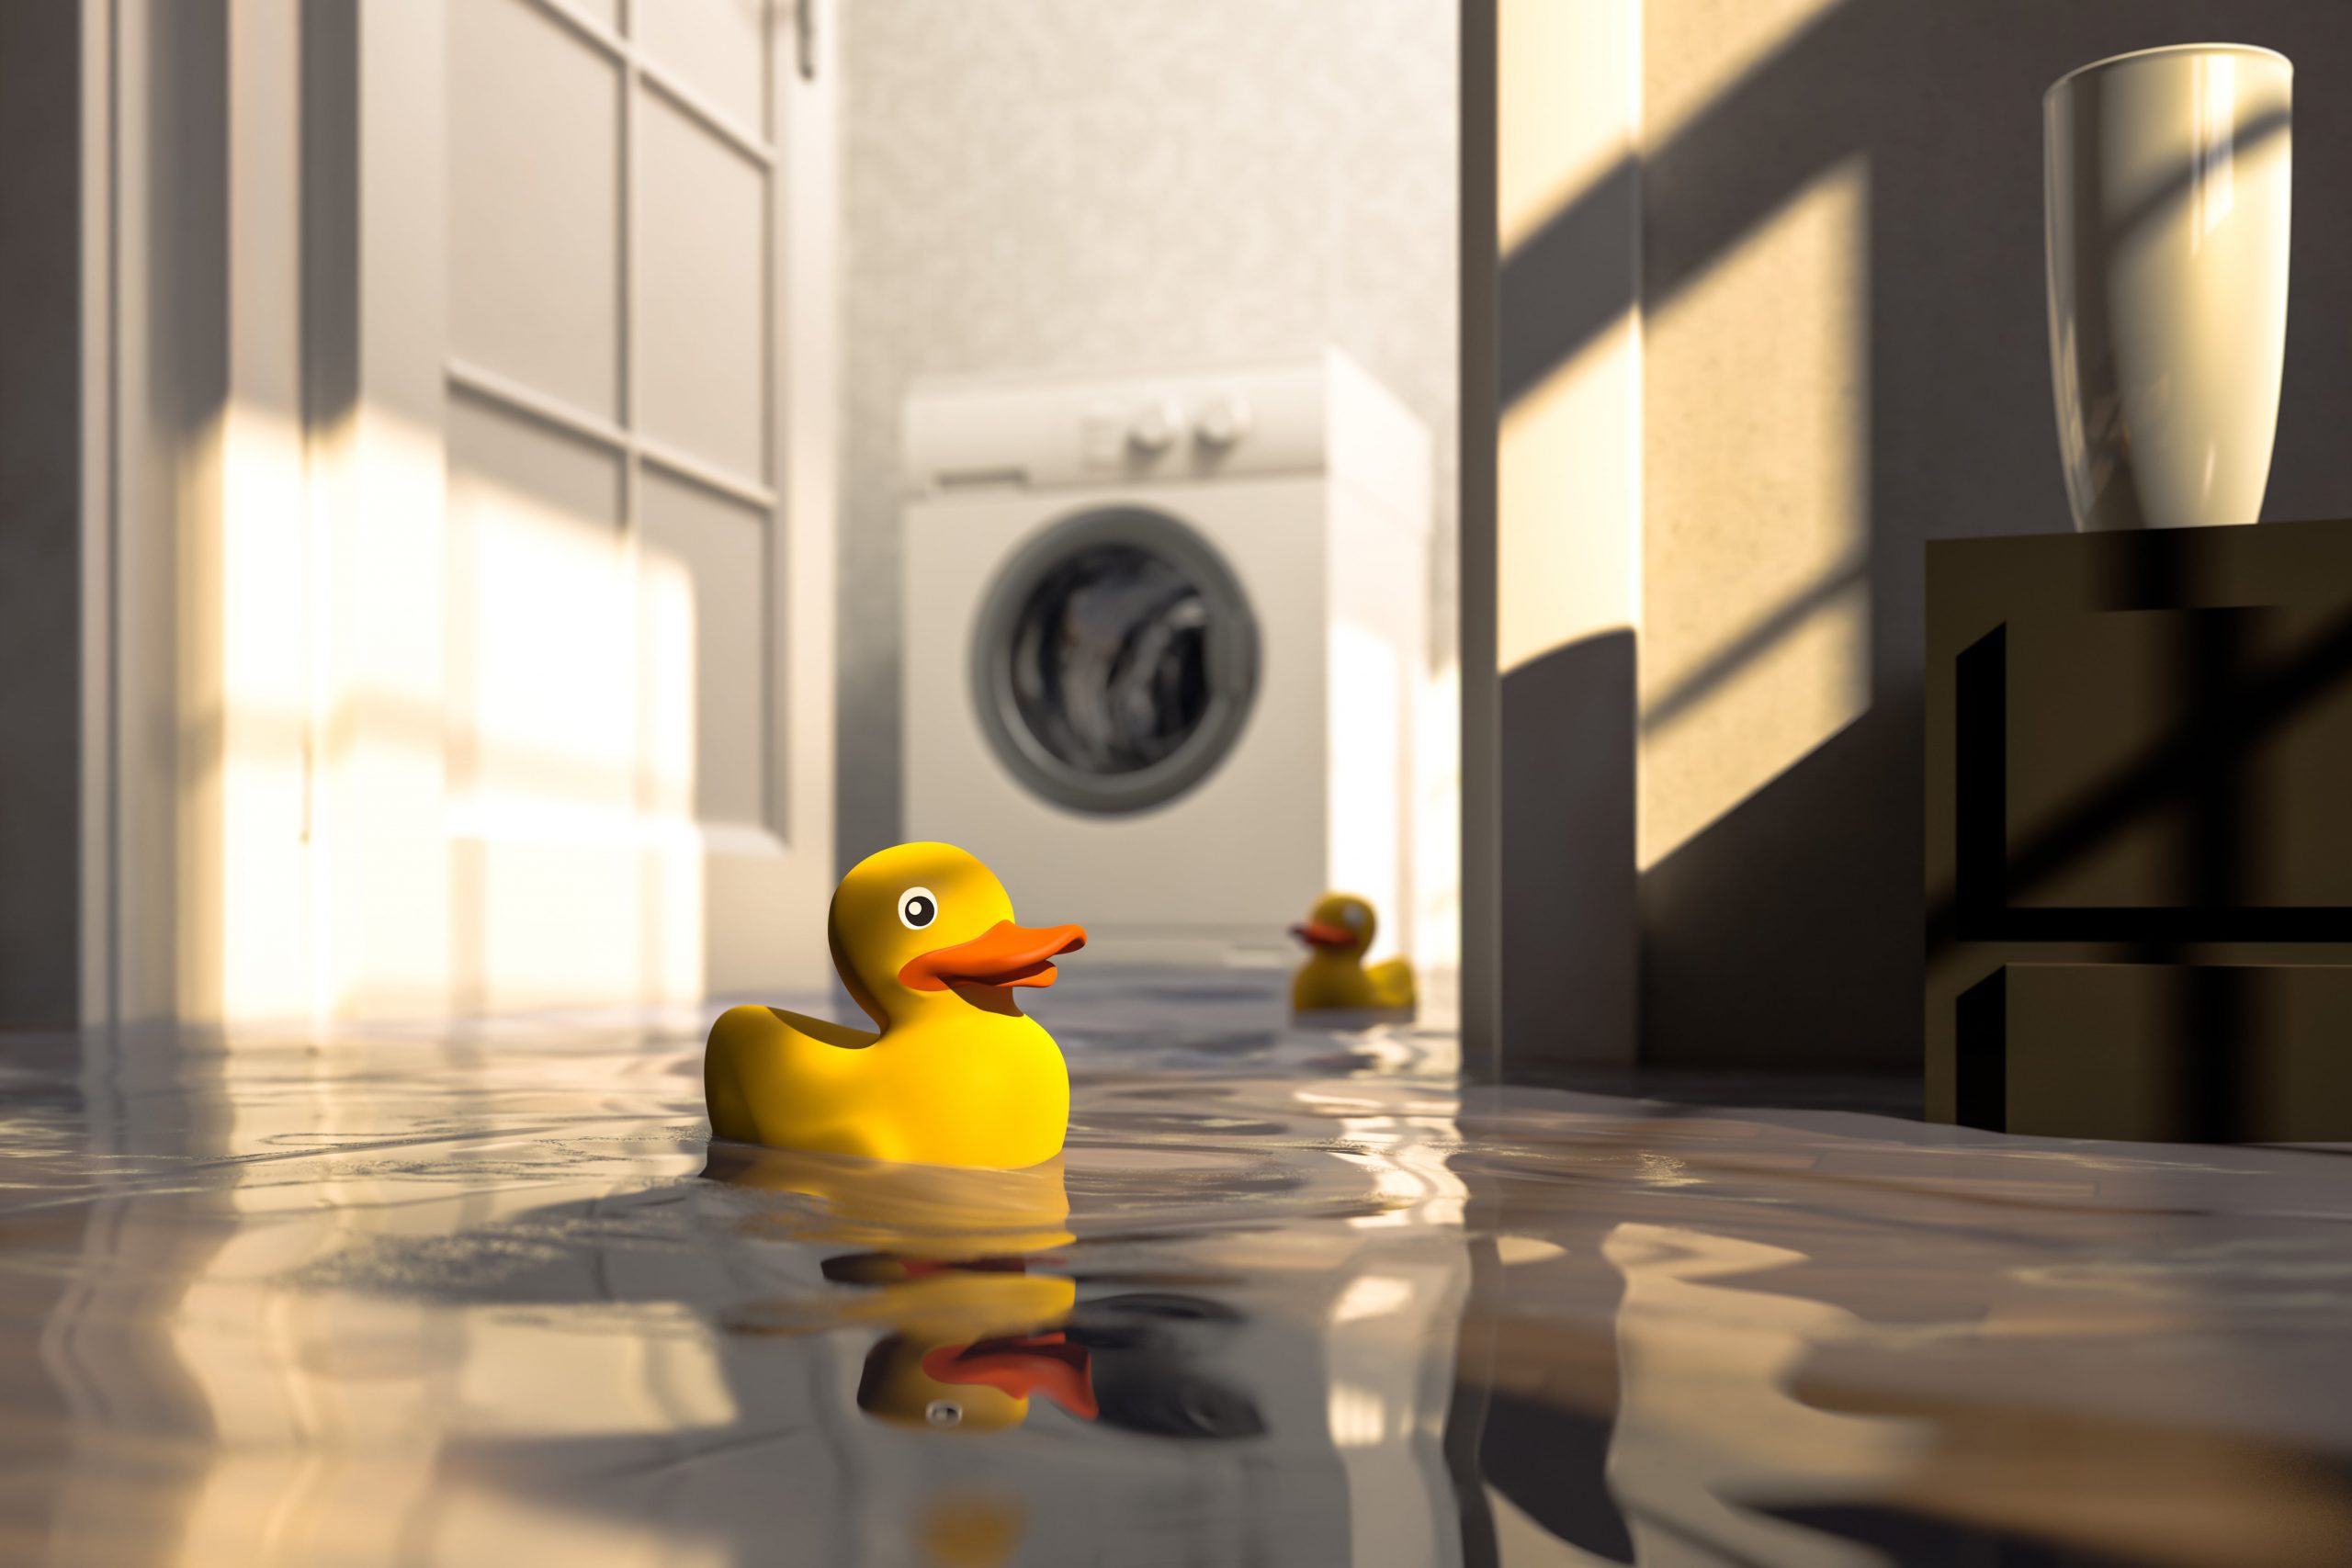 A rubber duck in the foreground sitting in a flooded basement with a washing machine in the background